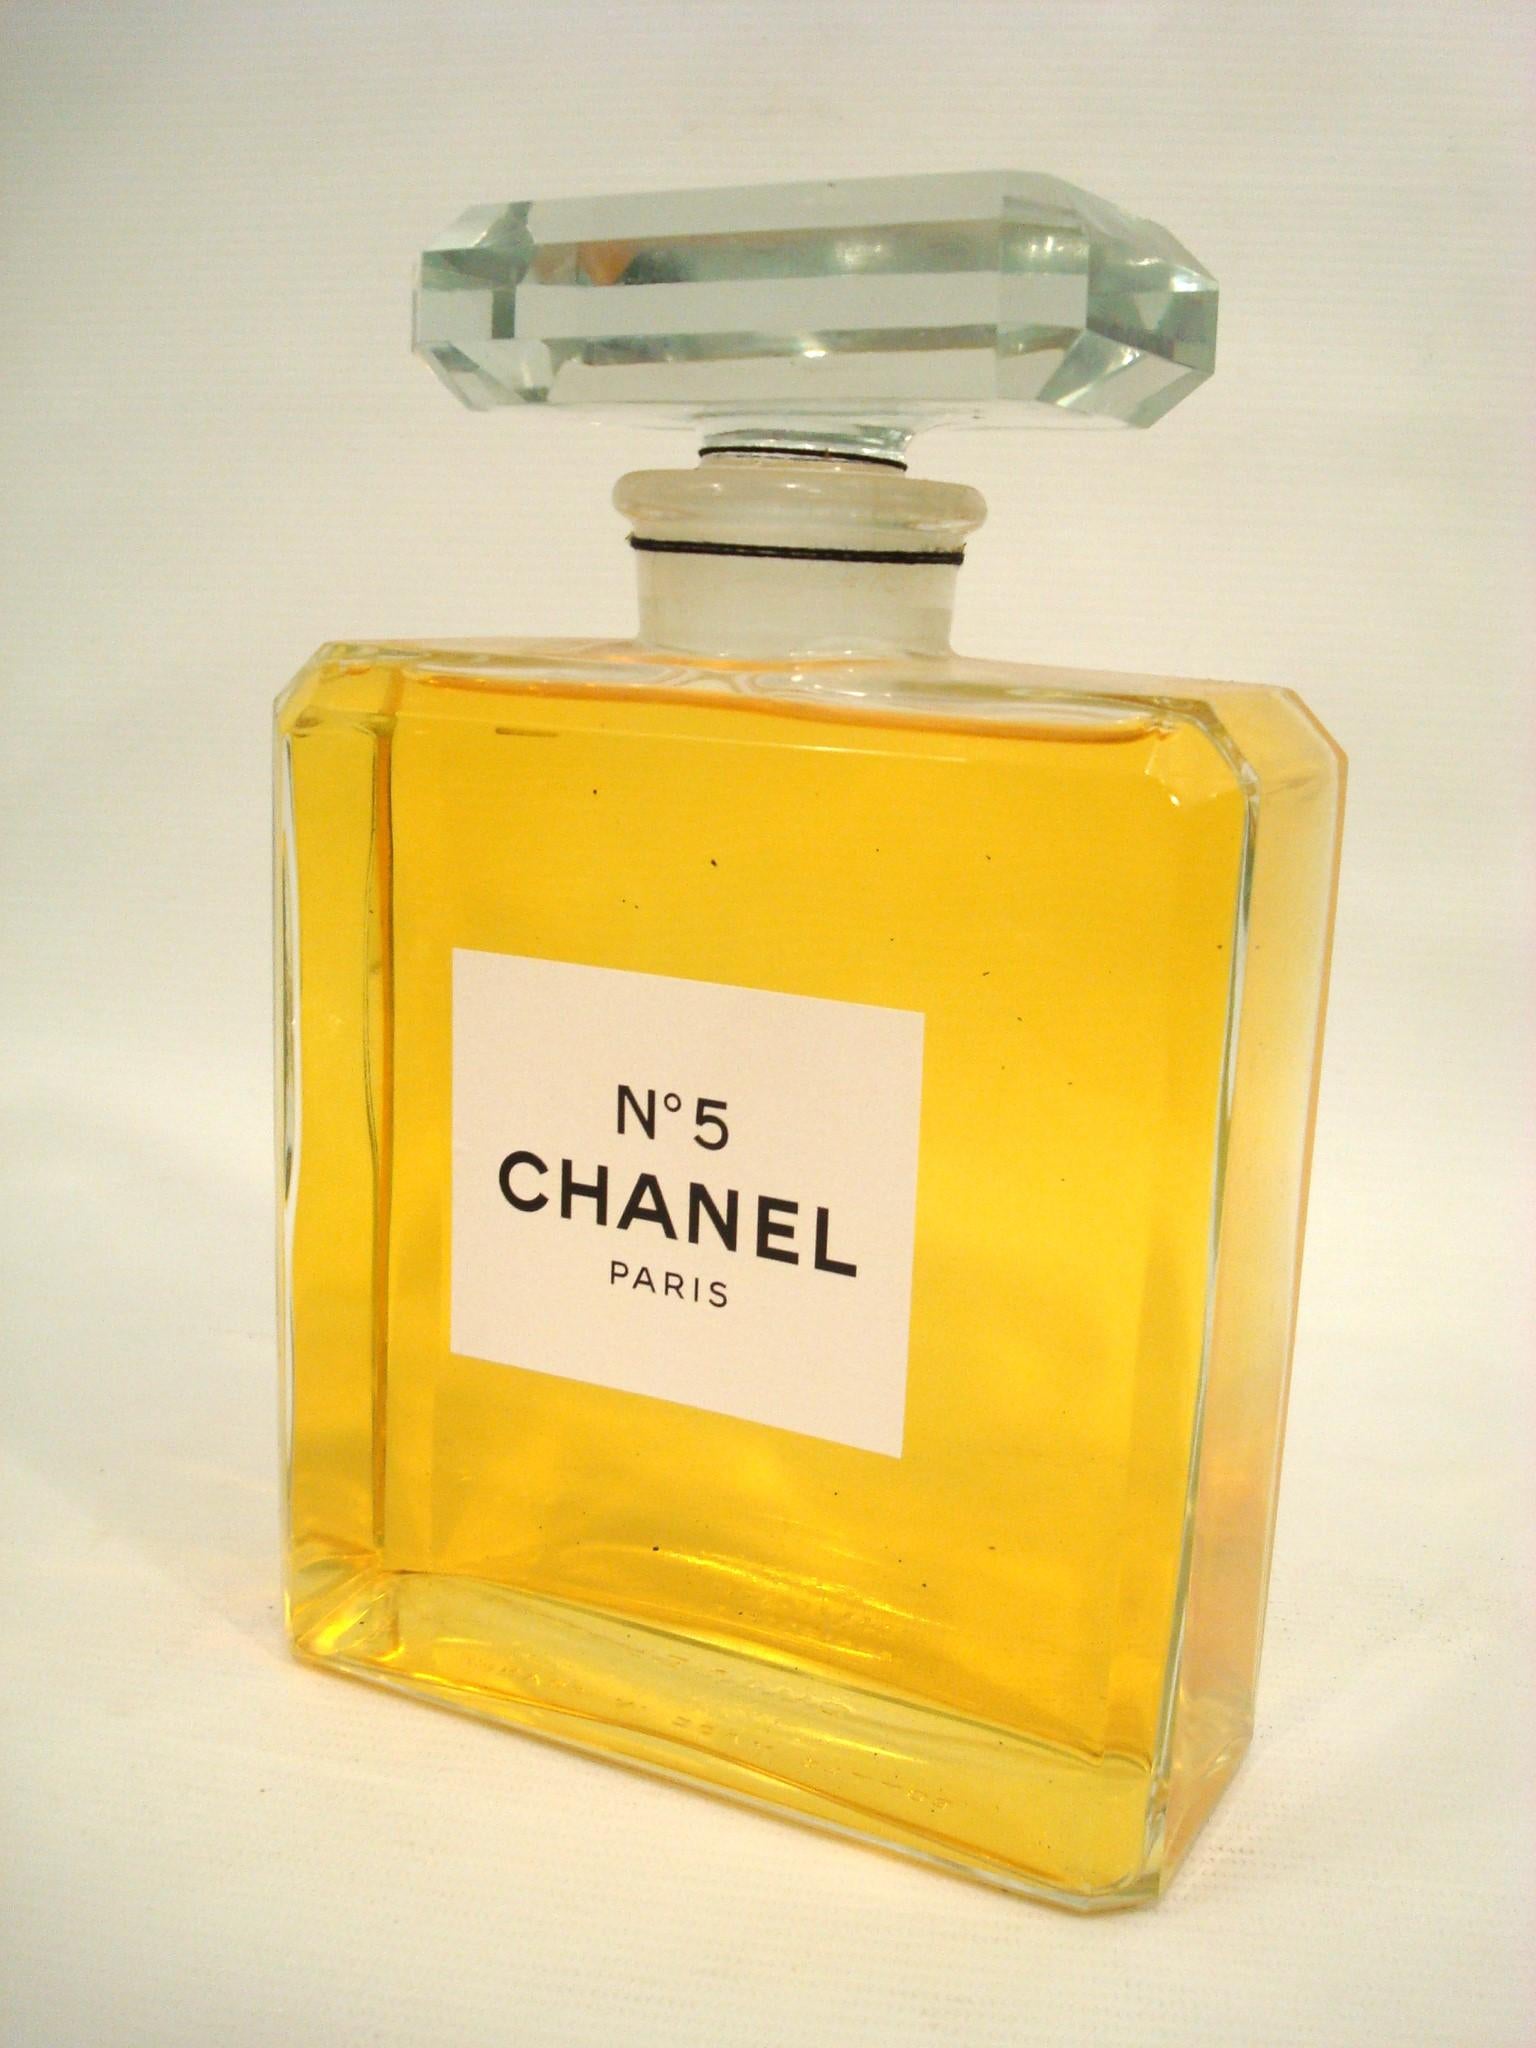 French Chanel N5 Huge Store Display Perfume Bottle Advertising, France, 20th Century For Sale